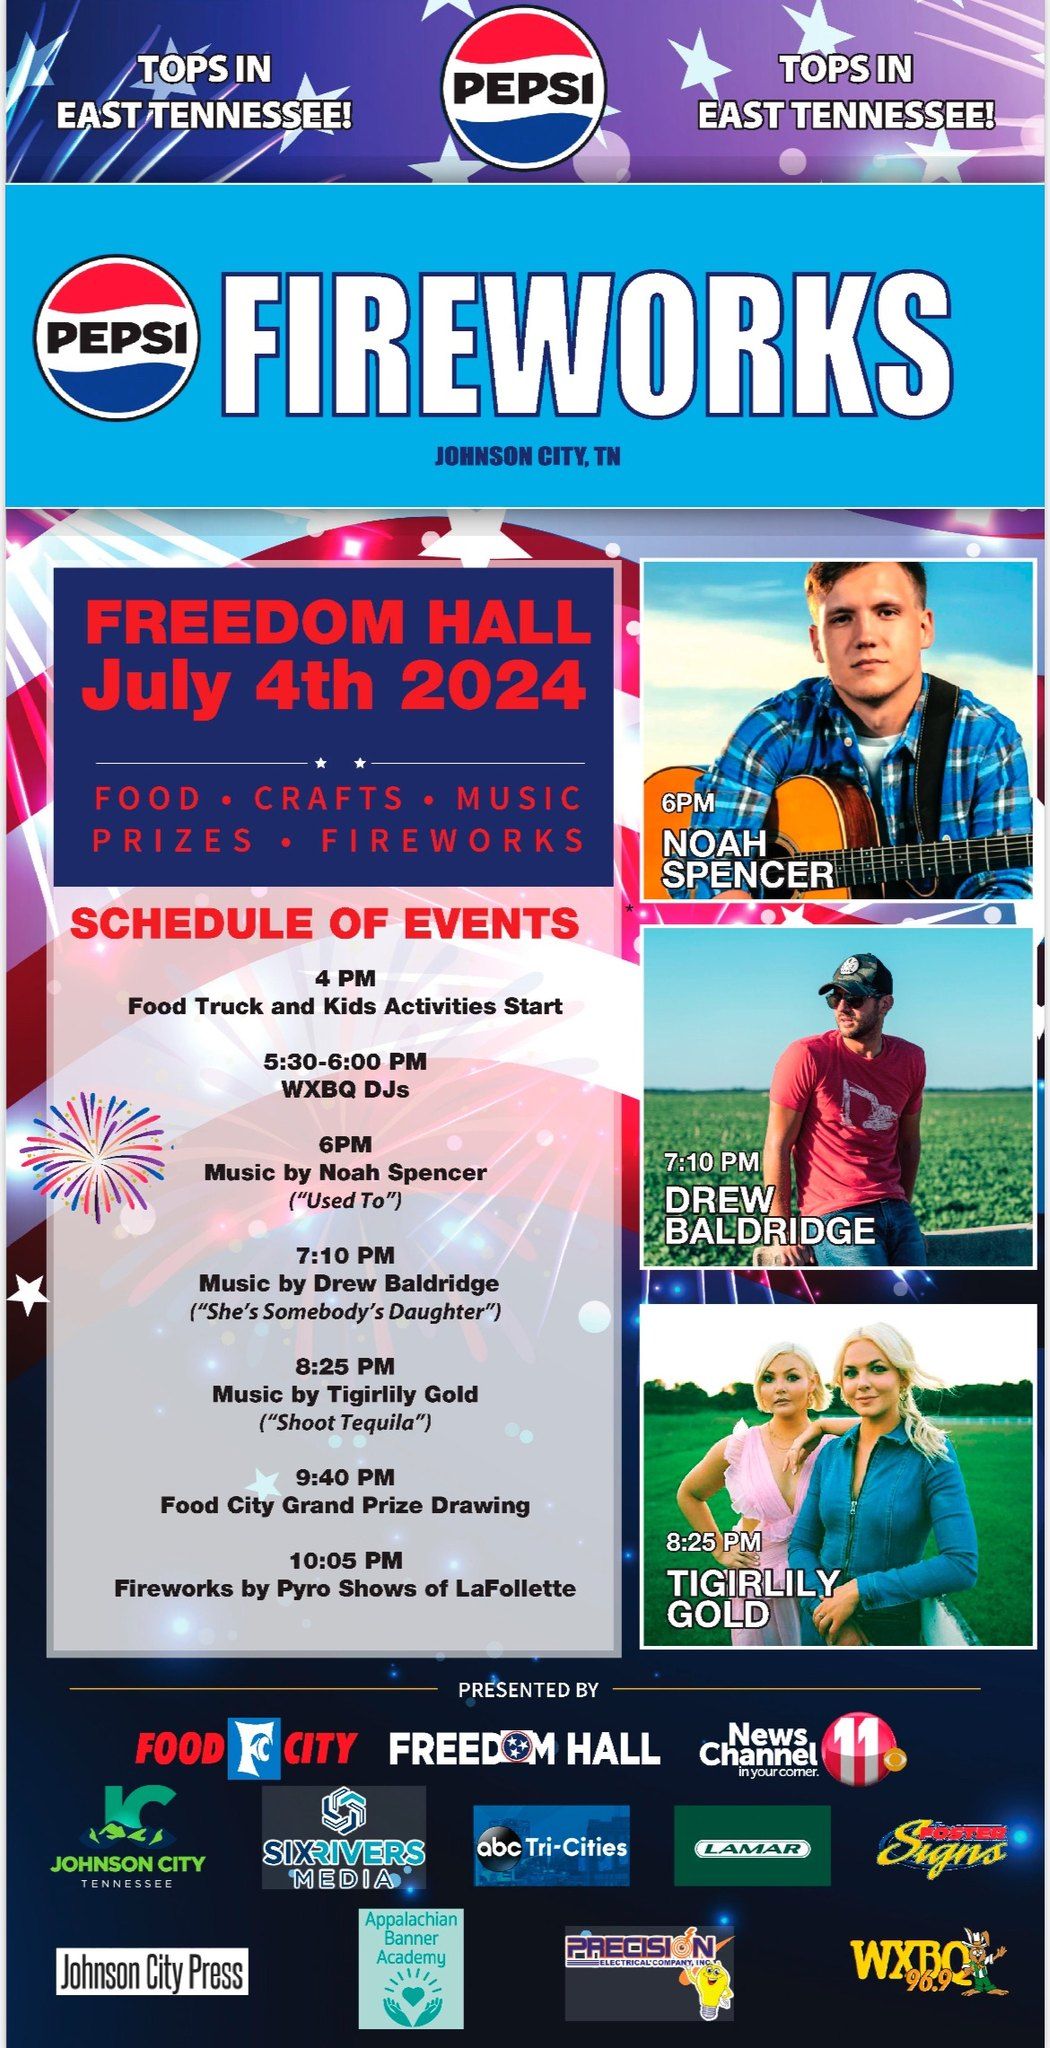 Inclusion for All: Sensory-Friendly Space for July 4th Fireworks at Freedom Hall!